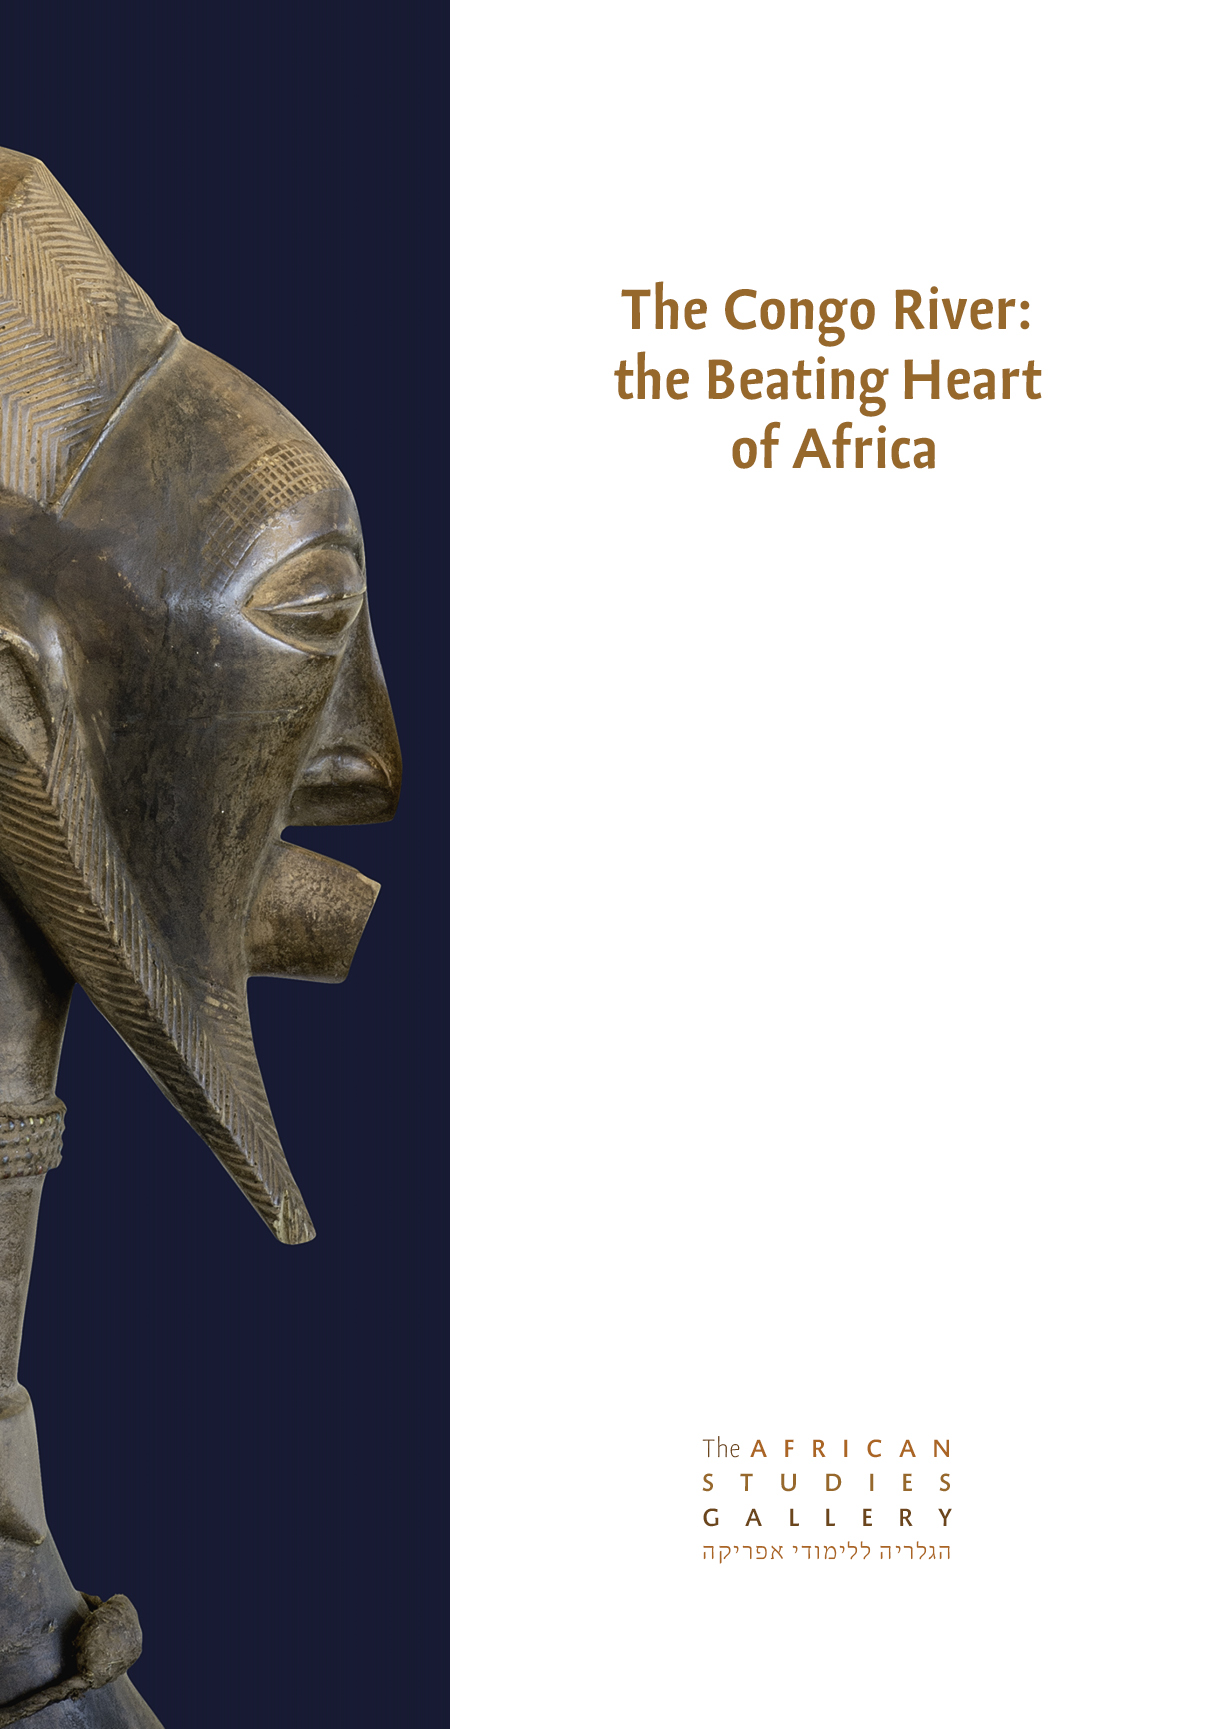 https://africanstudiesgallery.org/catalogues/5-congo-river.pdf